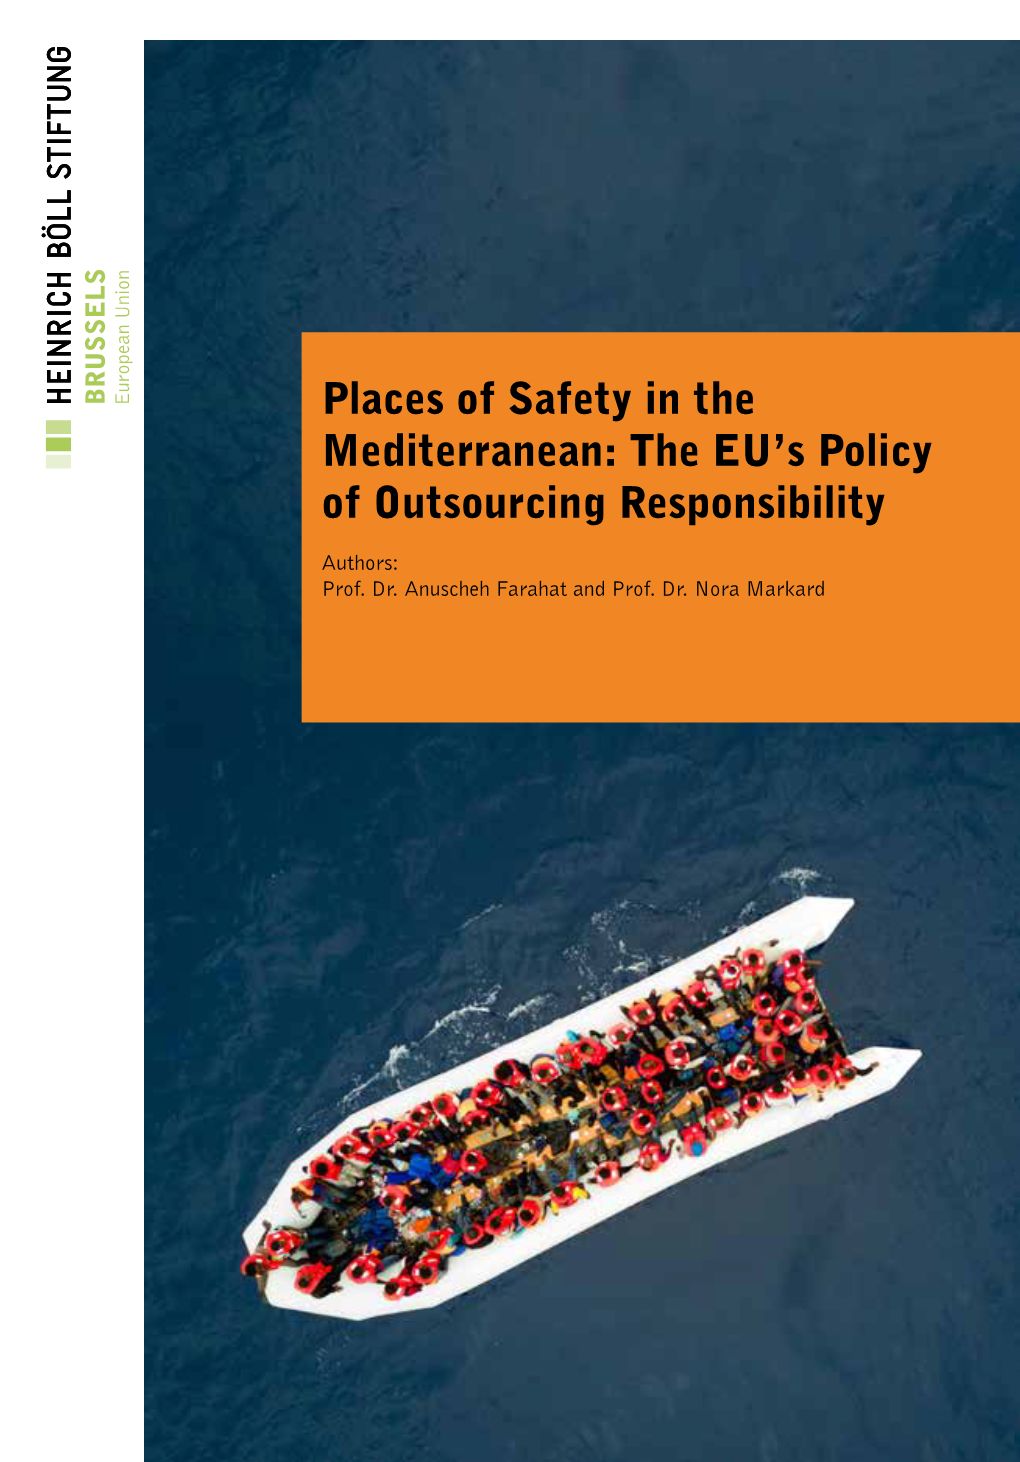 Places of Safety in the Mediterranean: the EU's Policy of Outsourcing